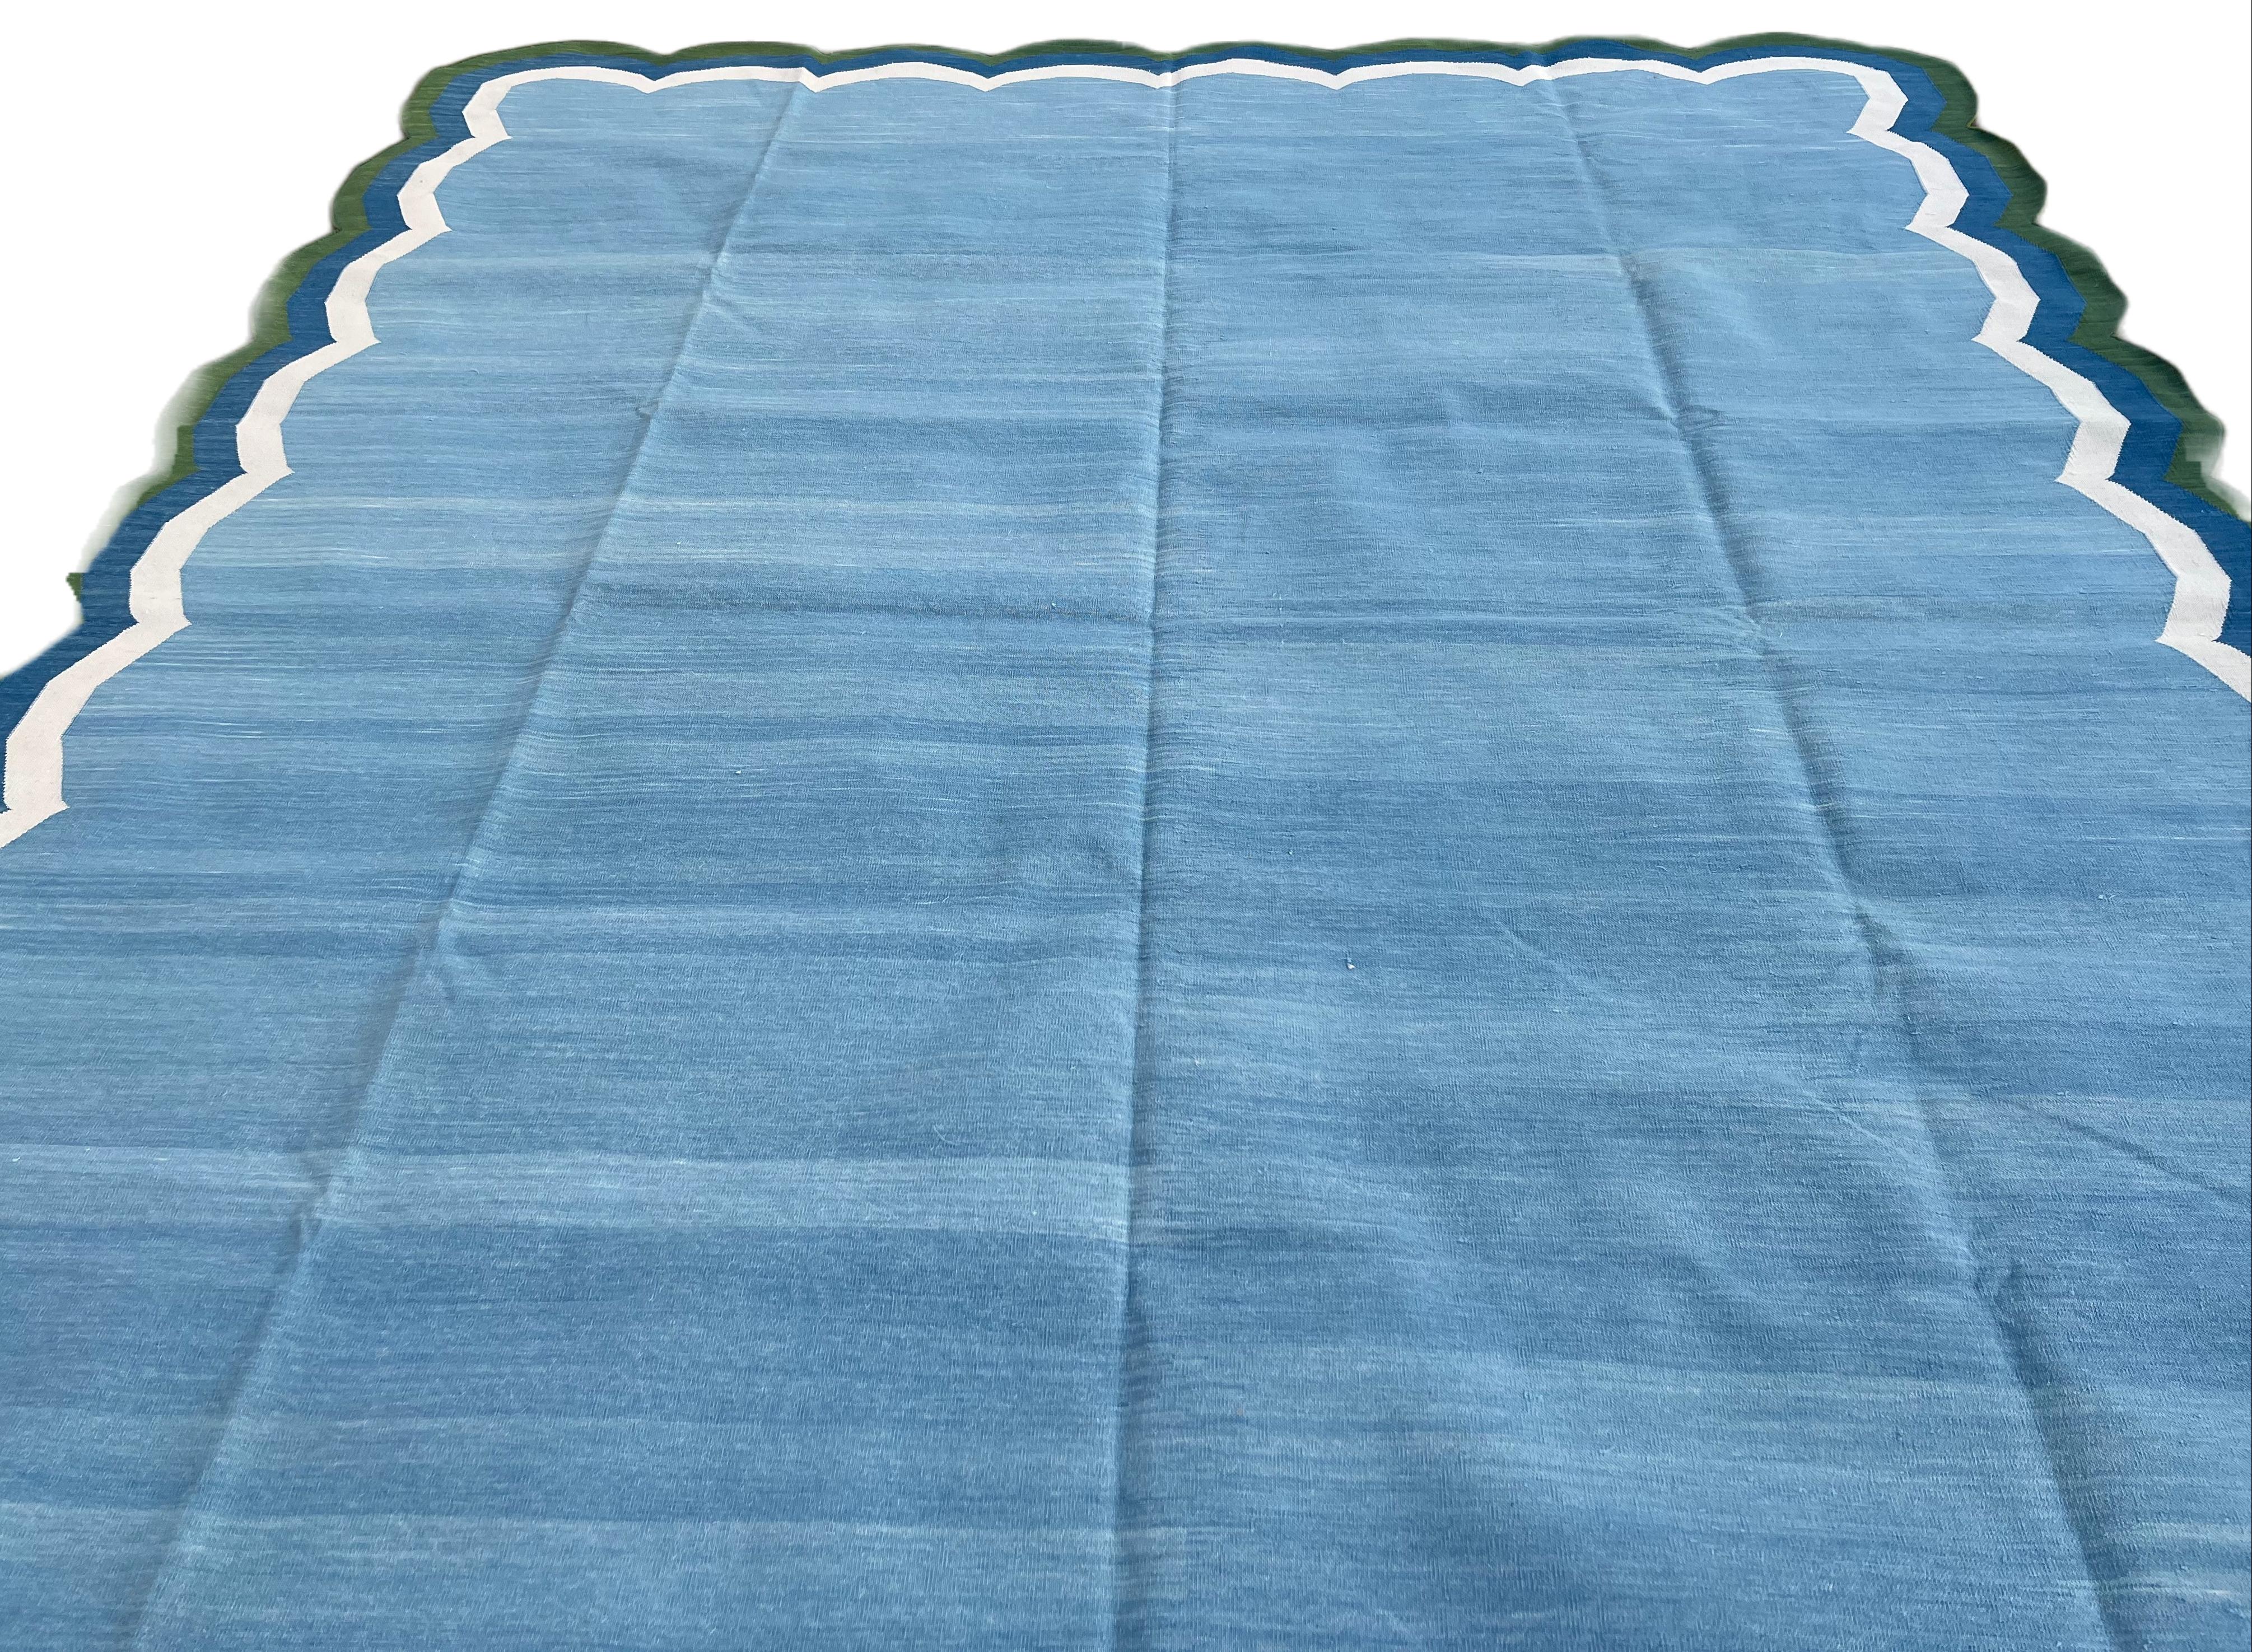 Handmade Cotton Area Flat Weave Rug, 8x10 Blue And Green Scallop Striped Dhurrie In New Condition For Sale In Jaipur, IN